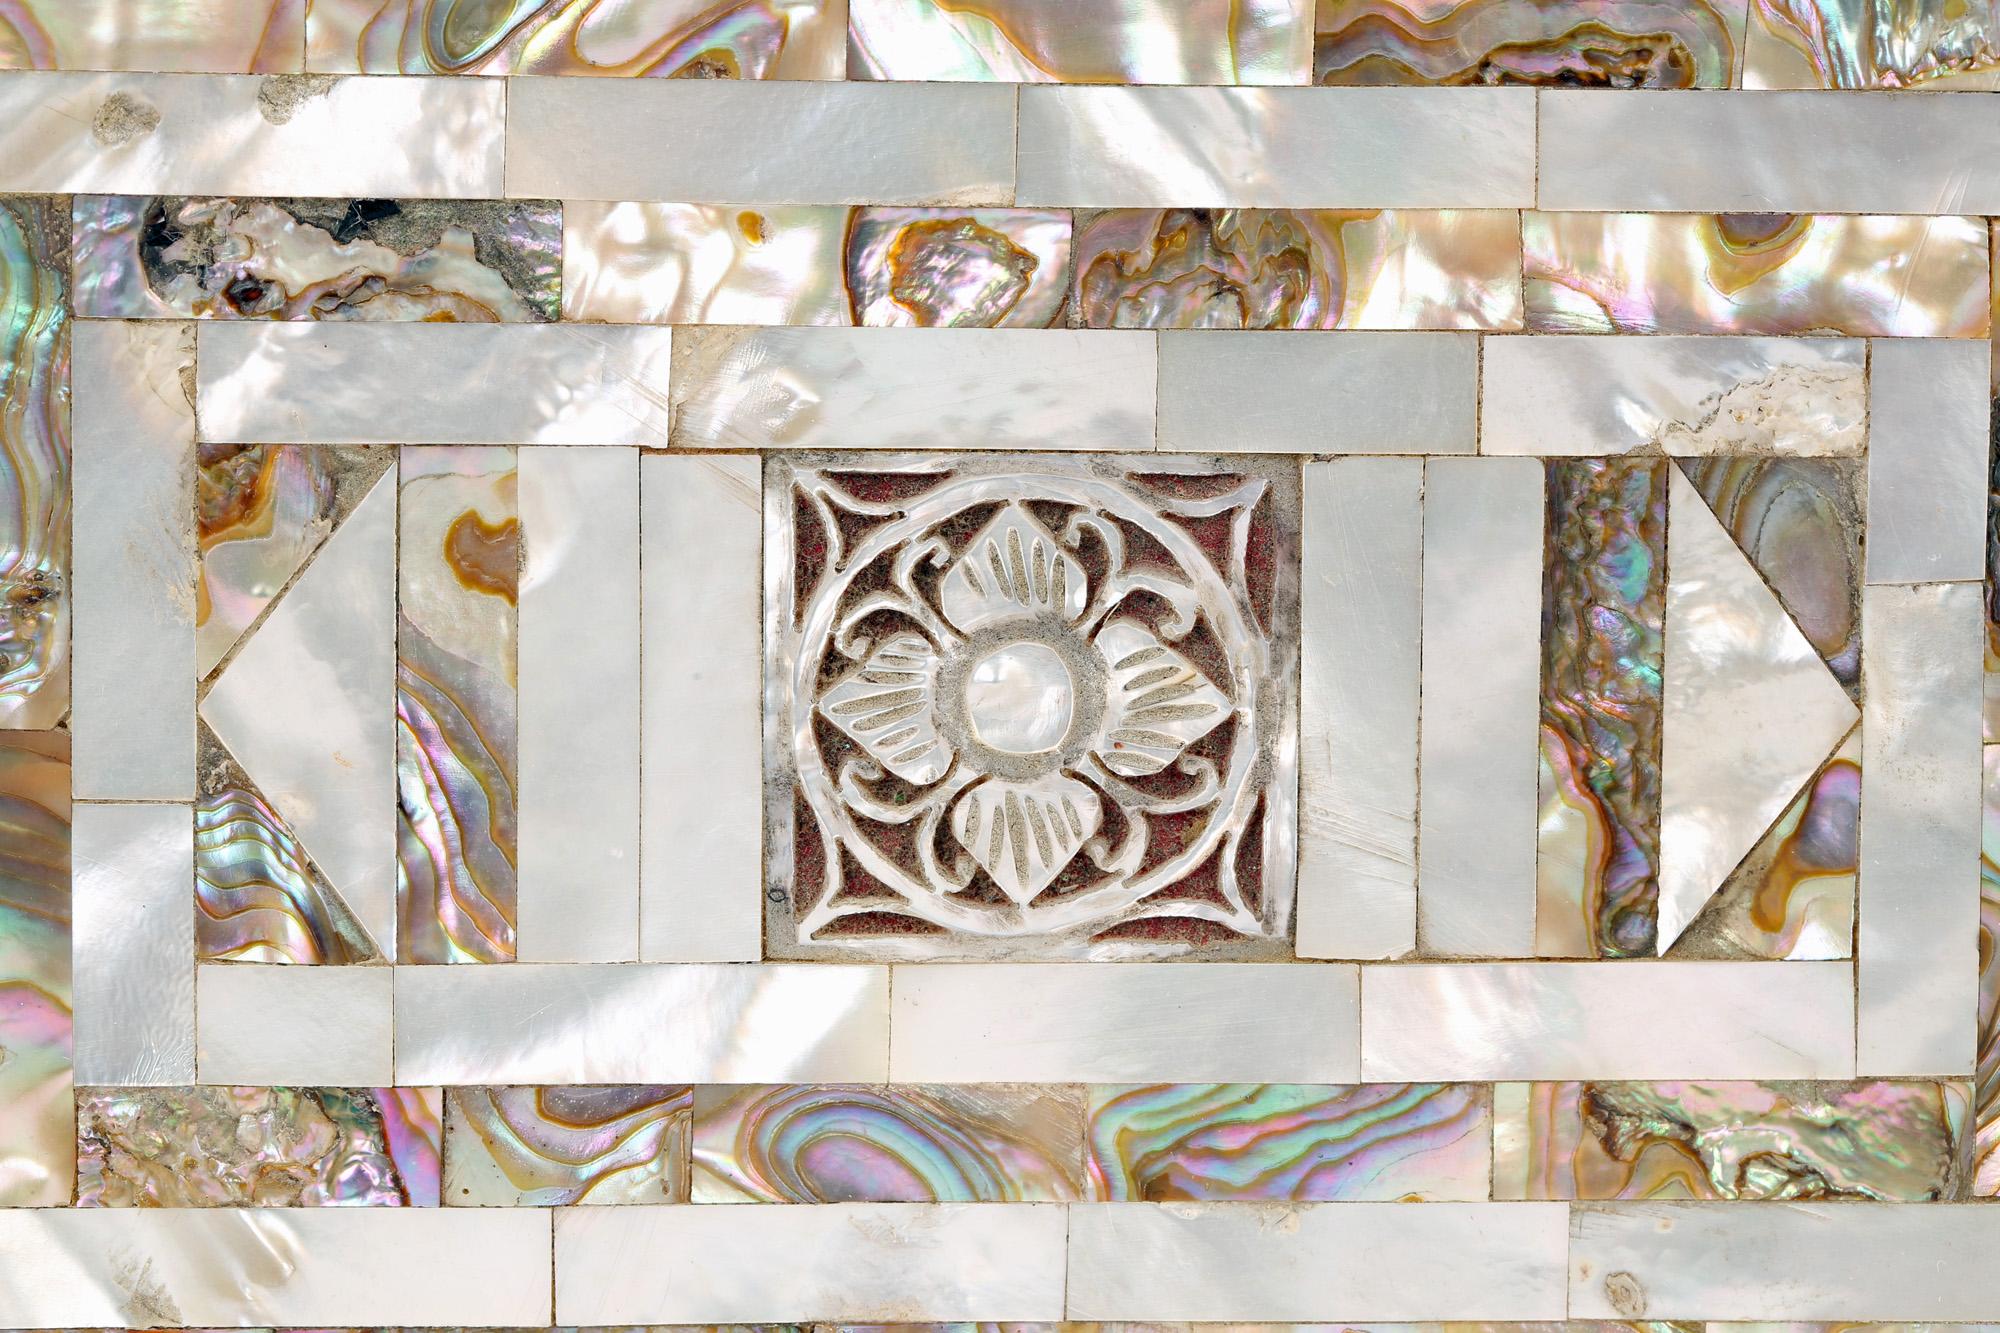 A stunning antique Victorian mother of pearl inlaid jewelry box dating from the 19th century. The box is of rectangular form with the wooden carcass mounted with mother of pearl in varying shapes and in contrasting colors with panels with a cross